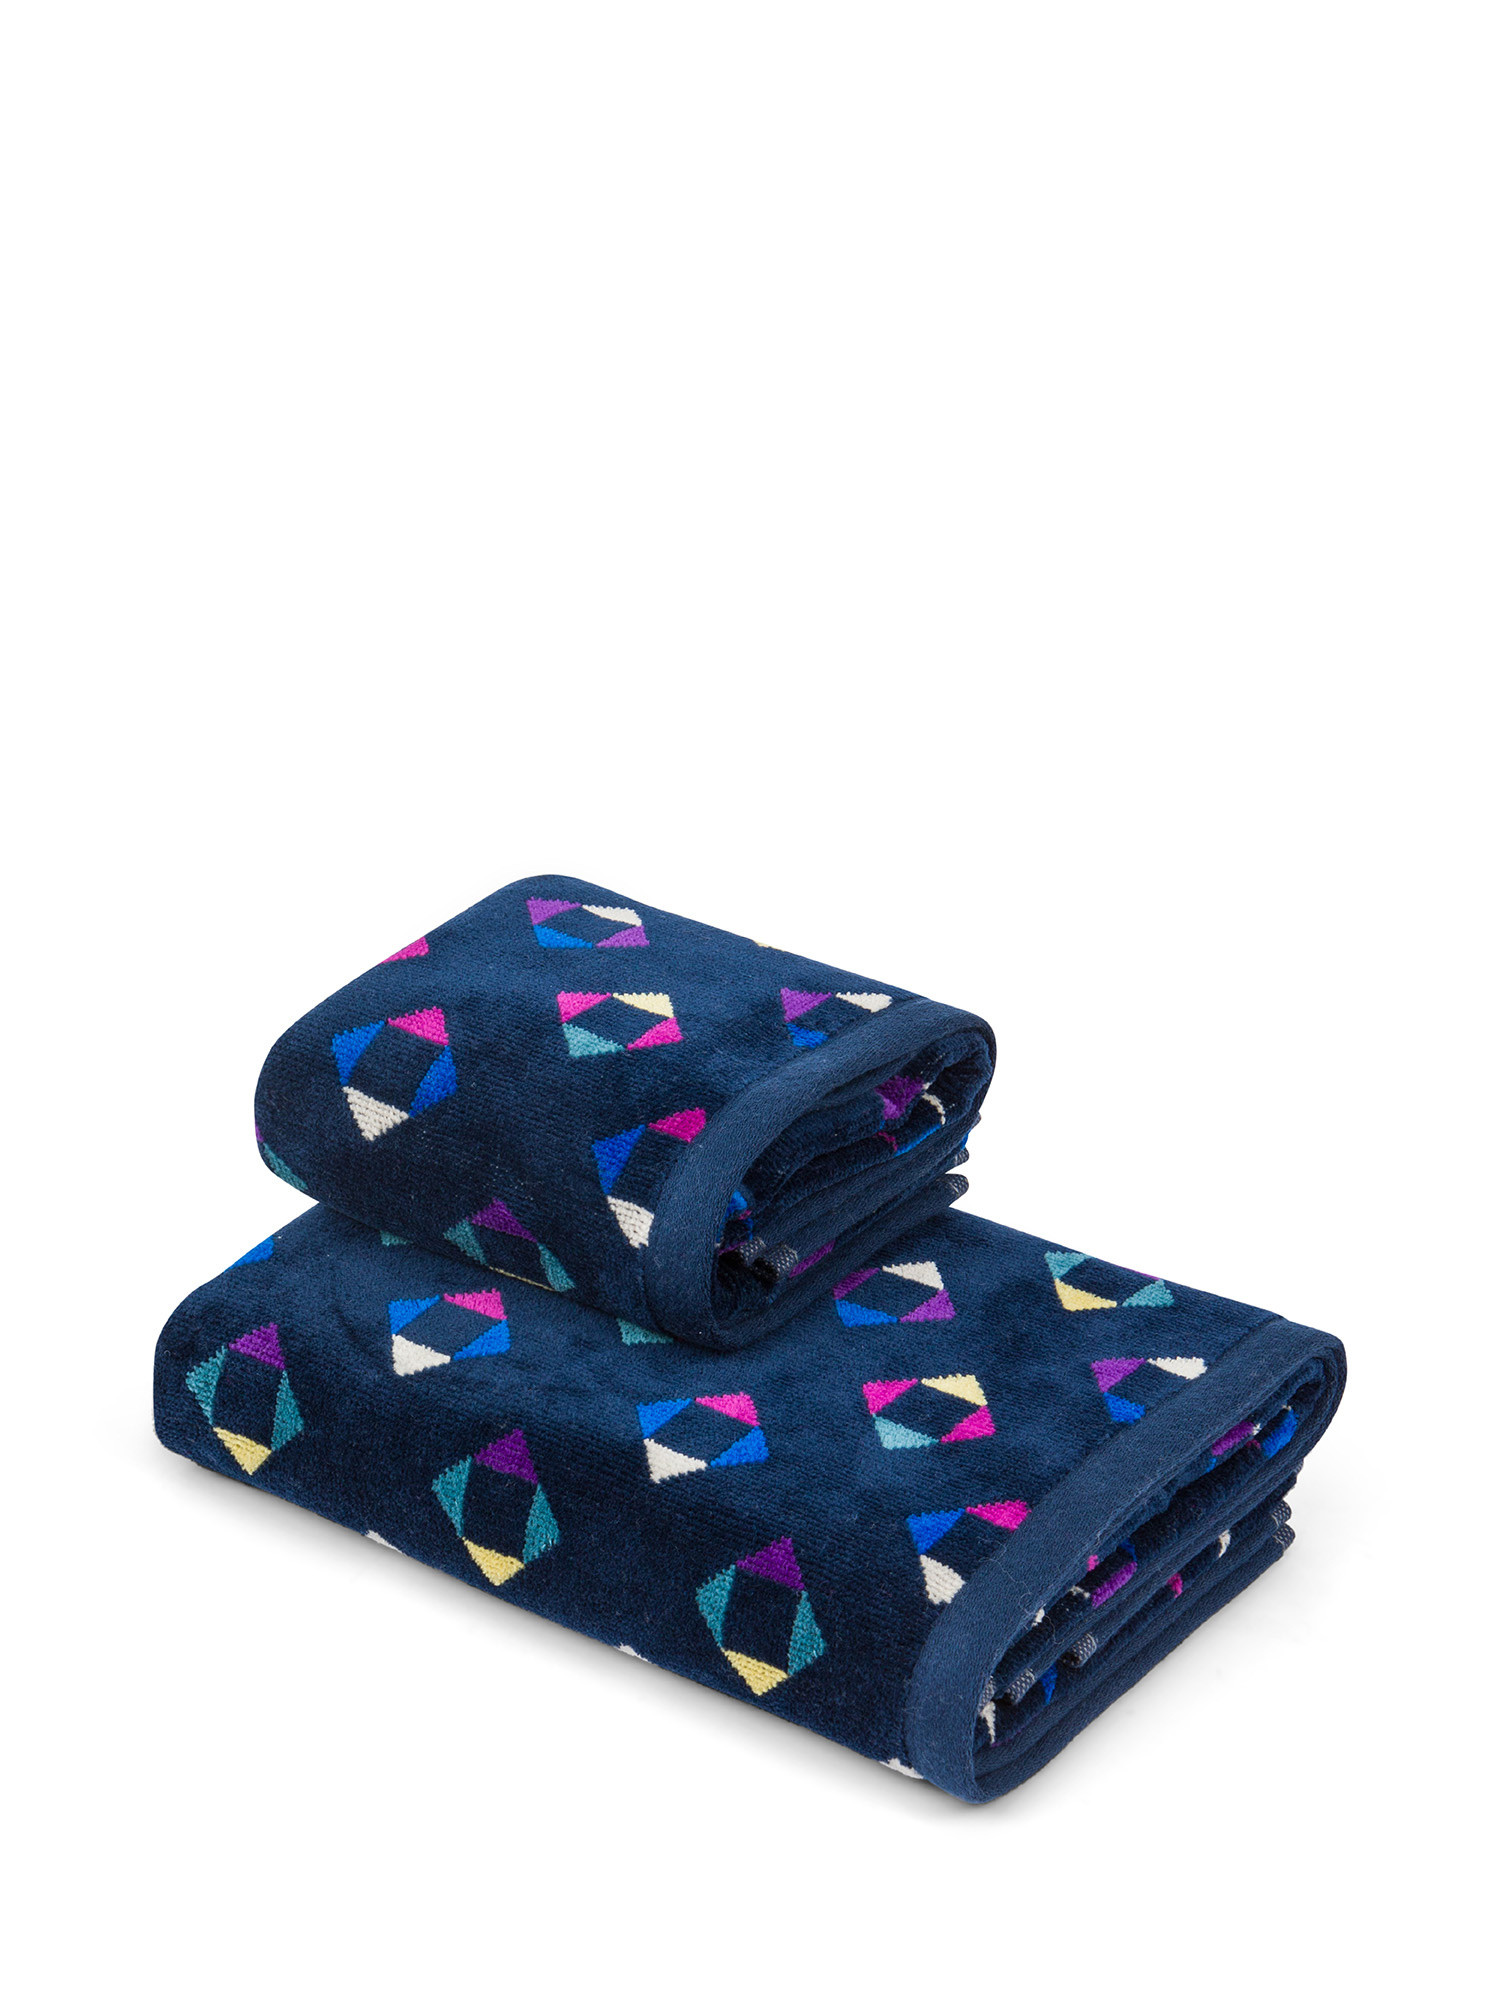 Cotton velour towel with geometric pattern, Multicolor, large image number 0